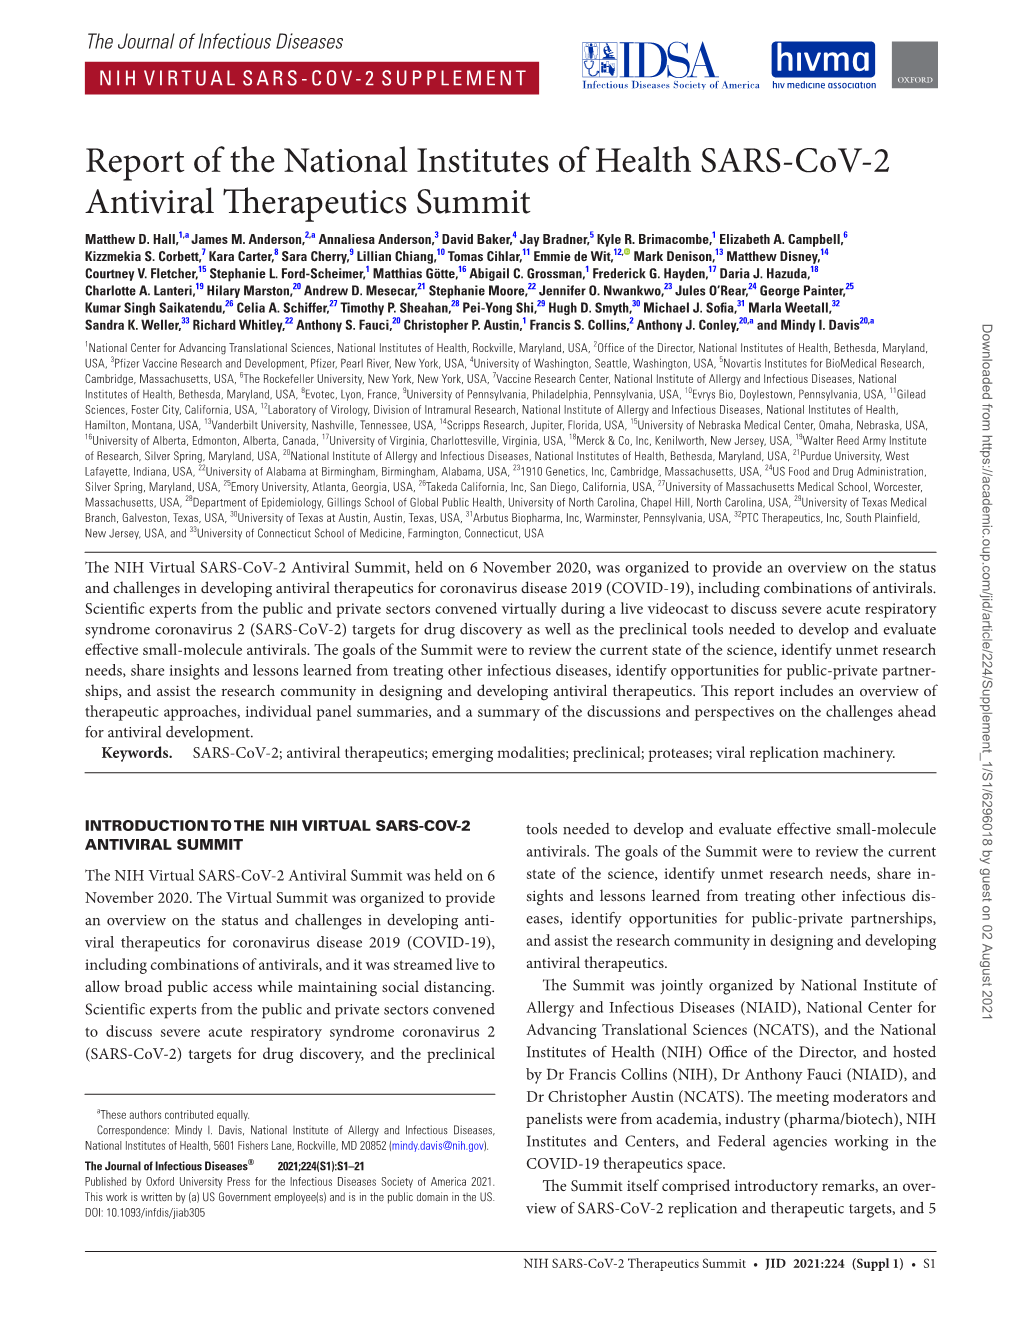 Report of the National Institutes of Health SARS-Cov-2 Antiviral Therapeutics Summit Matthew D